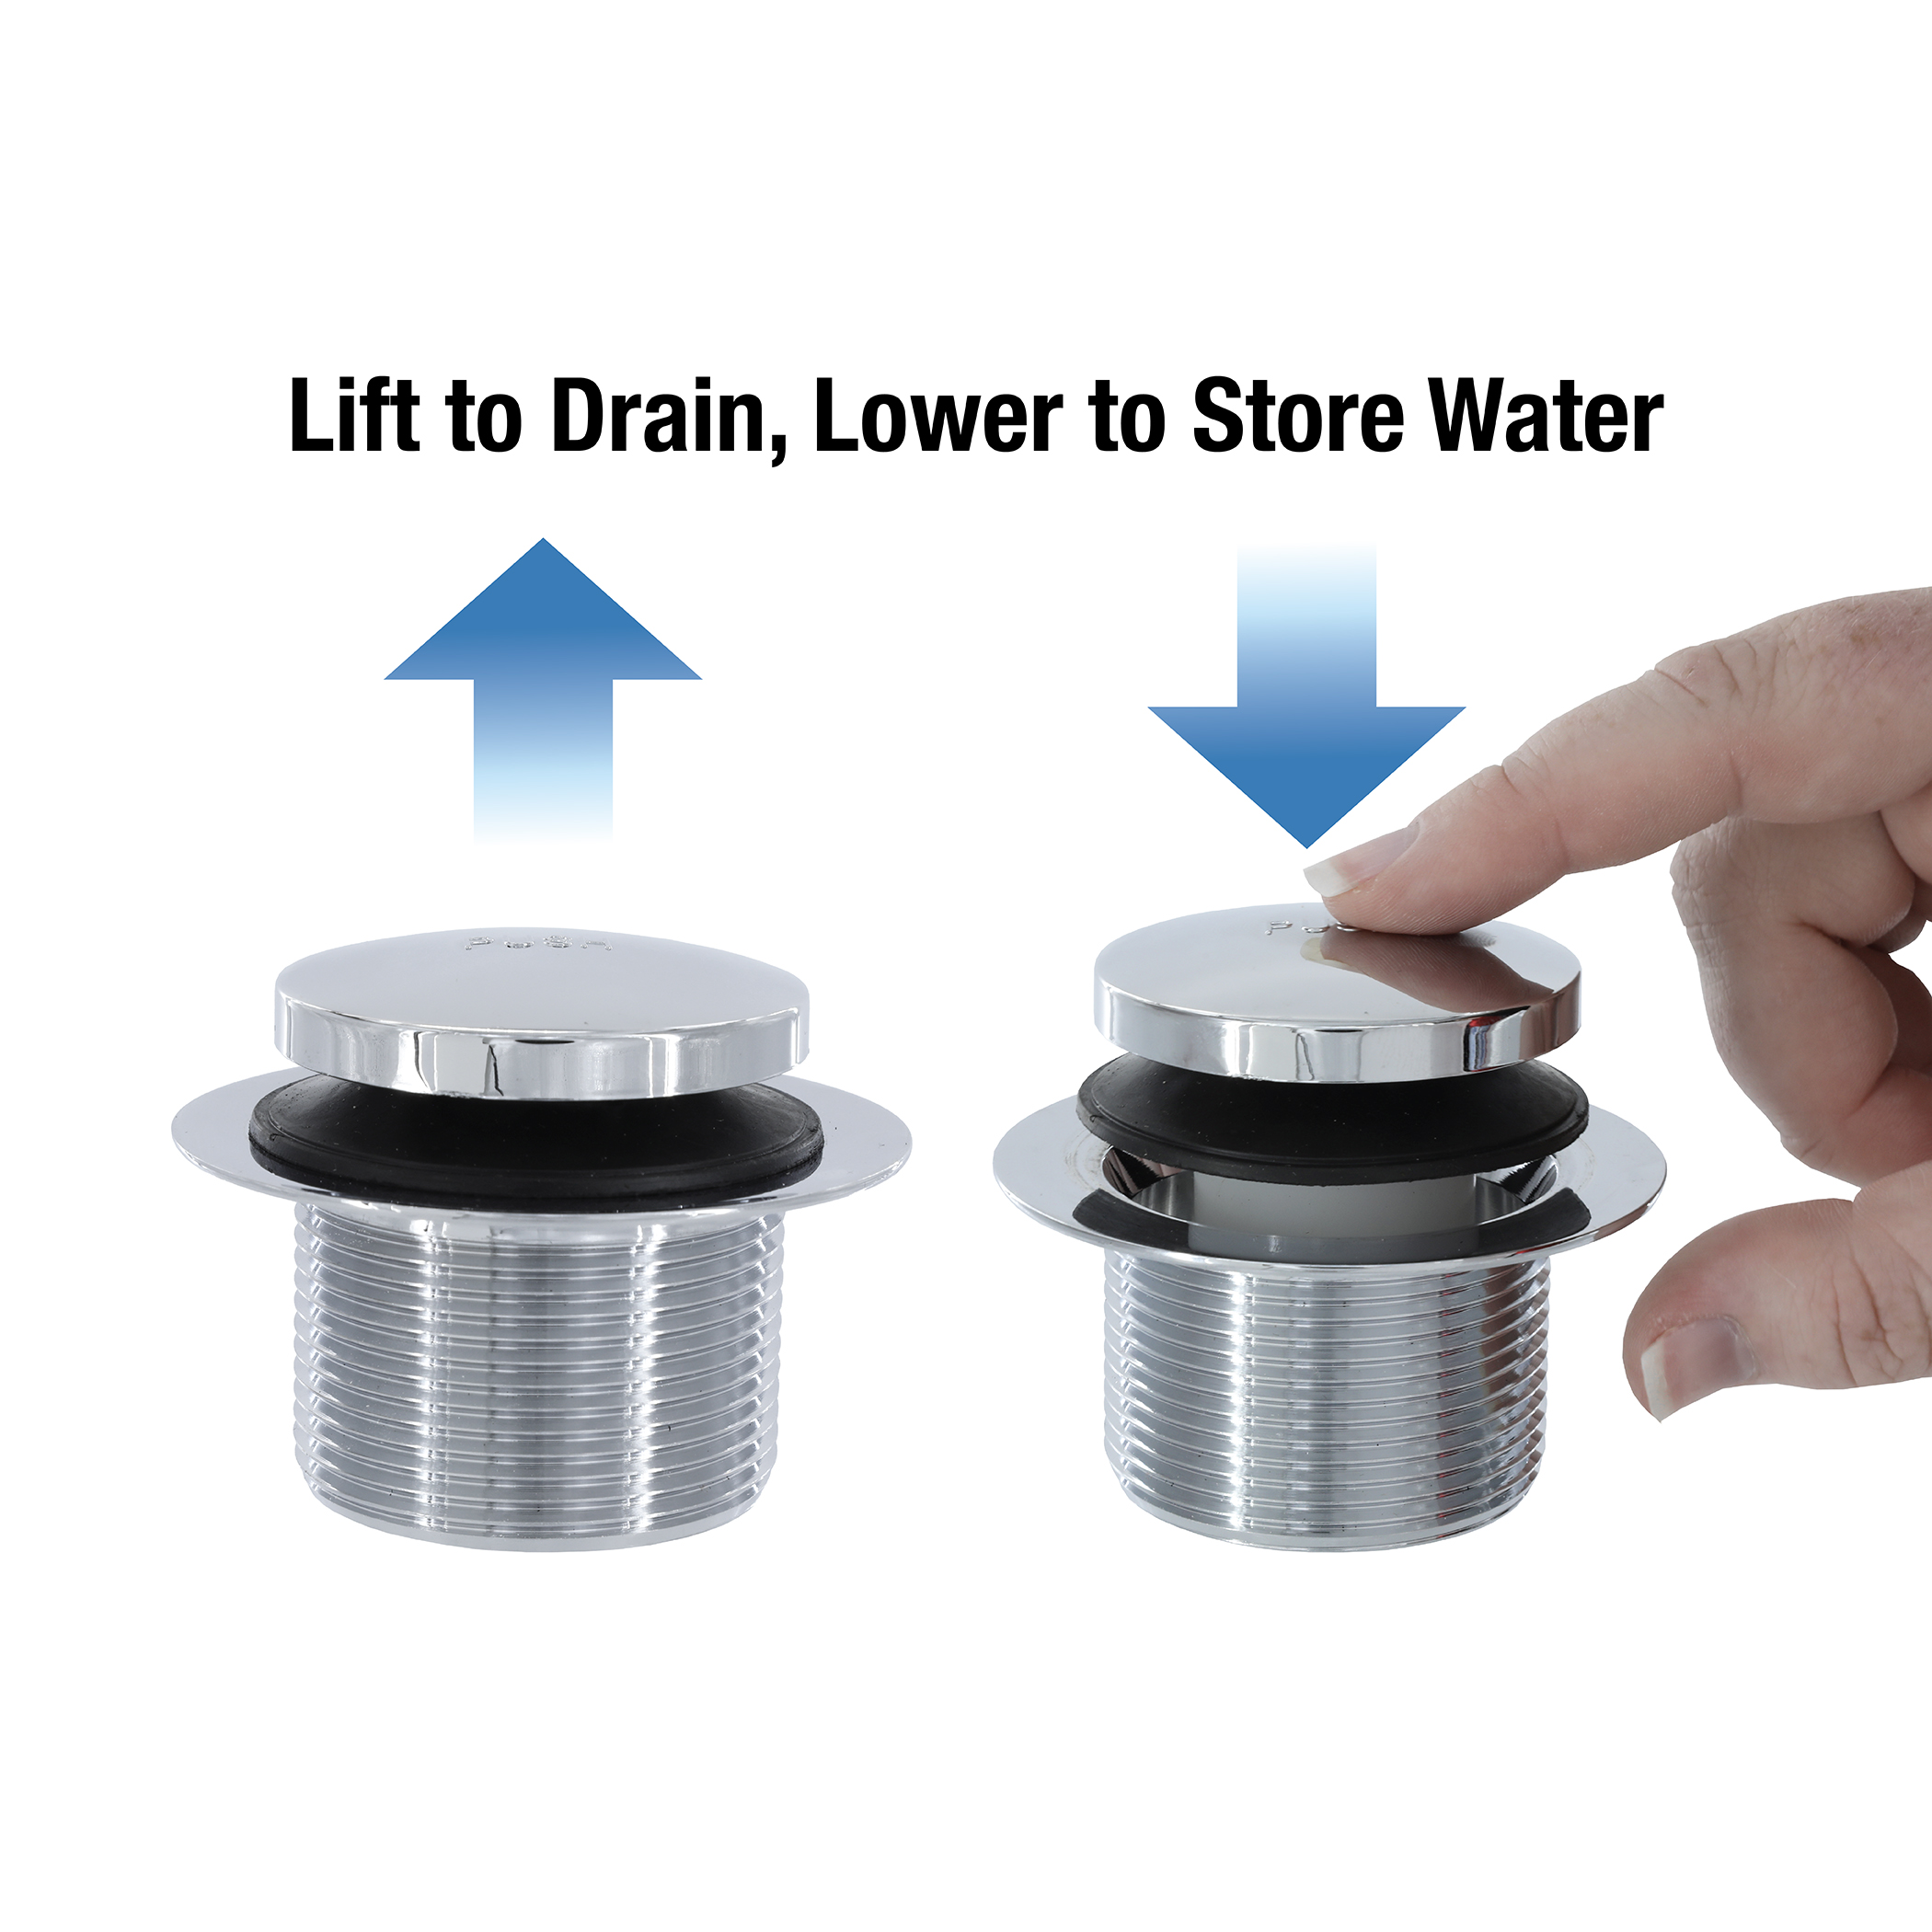 Danco Standard Size PVC Lift Out Tub Drain Strainer - Fort Mitchell, AL -  Fort Mitchell Trading Post & Hardware